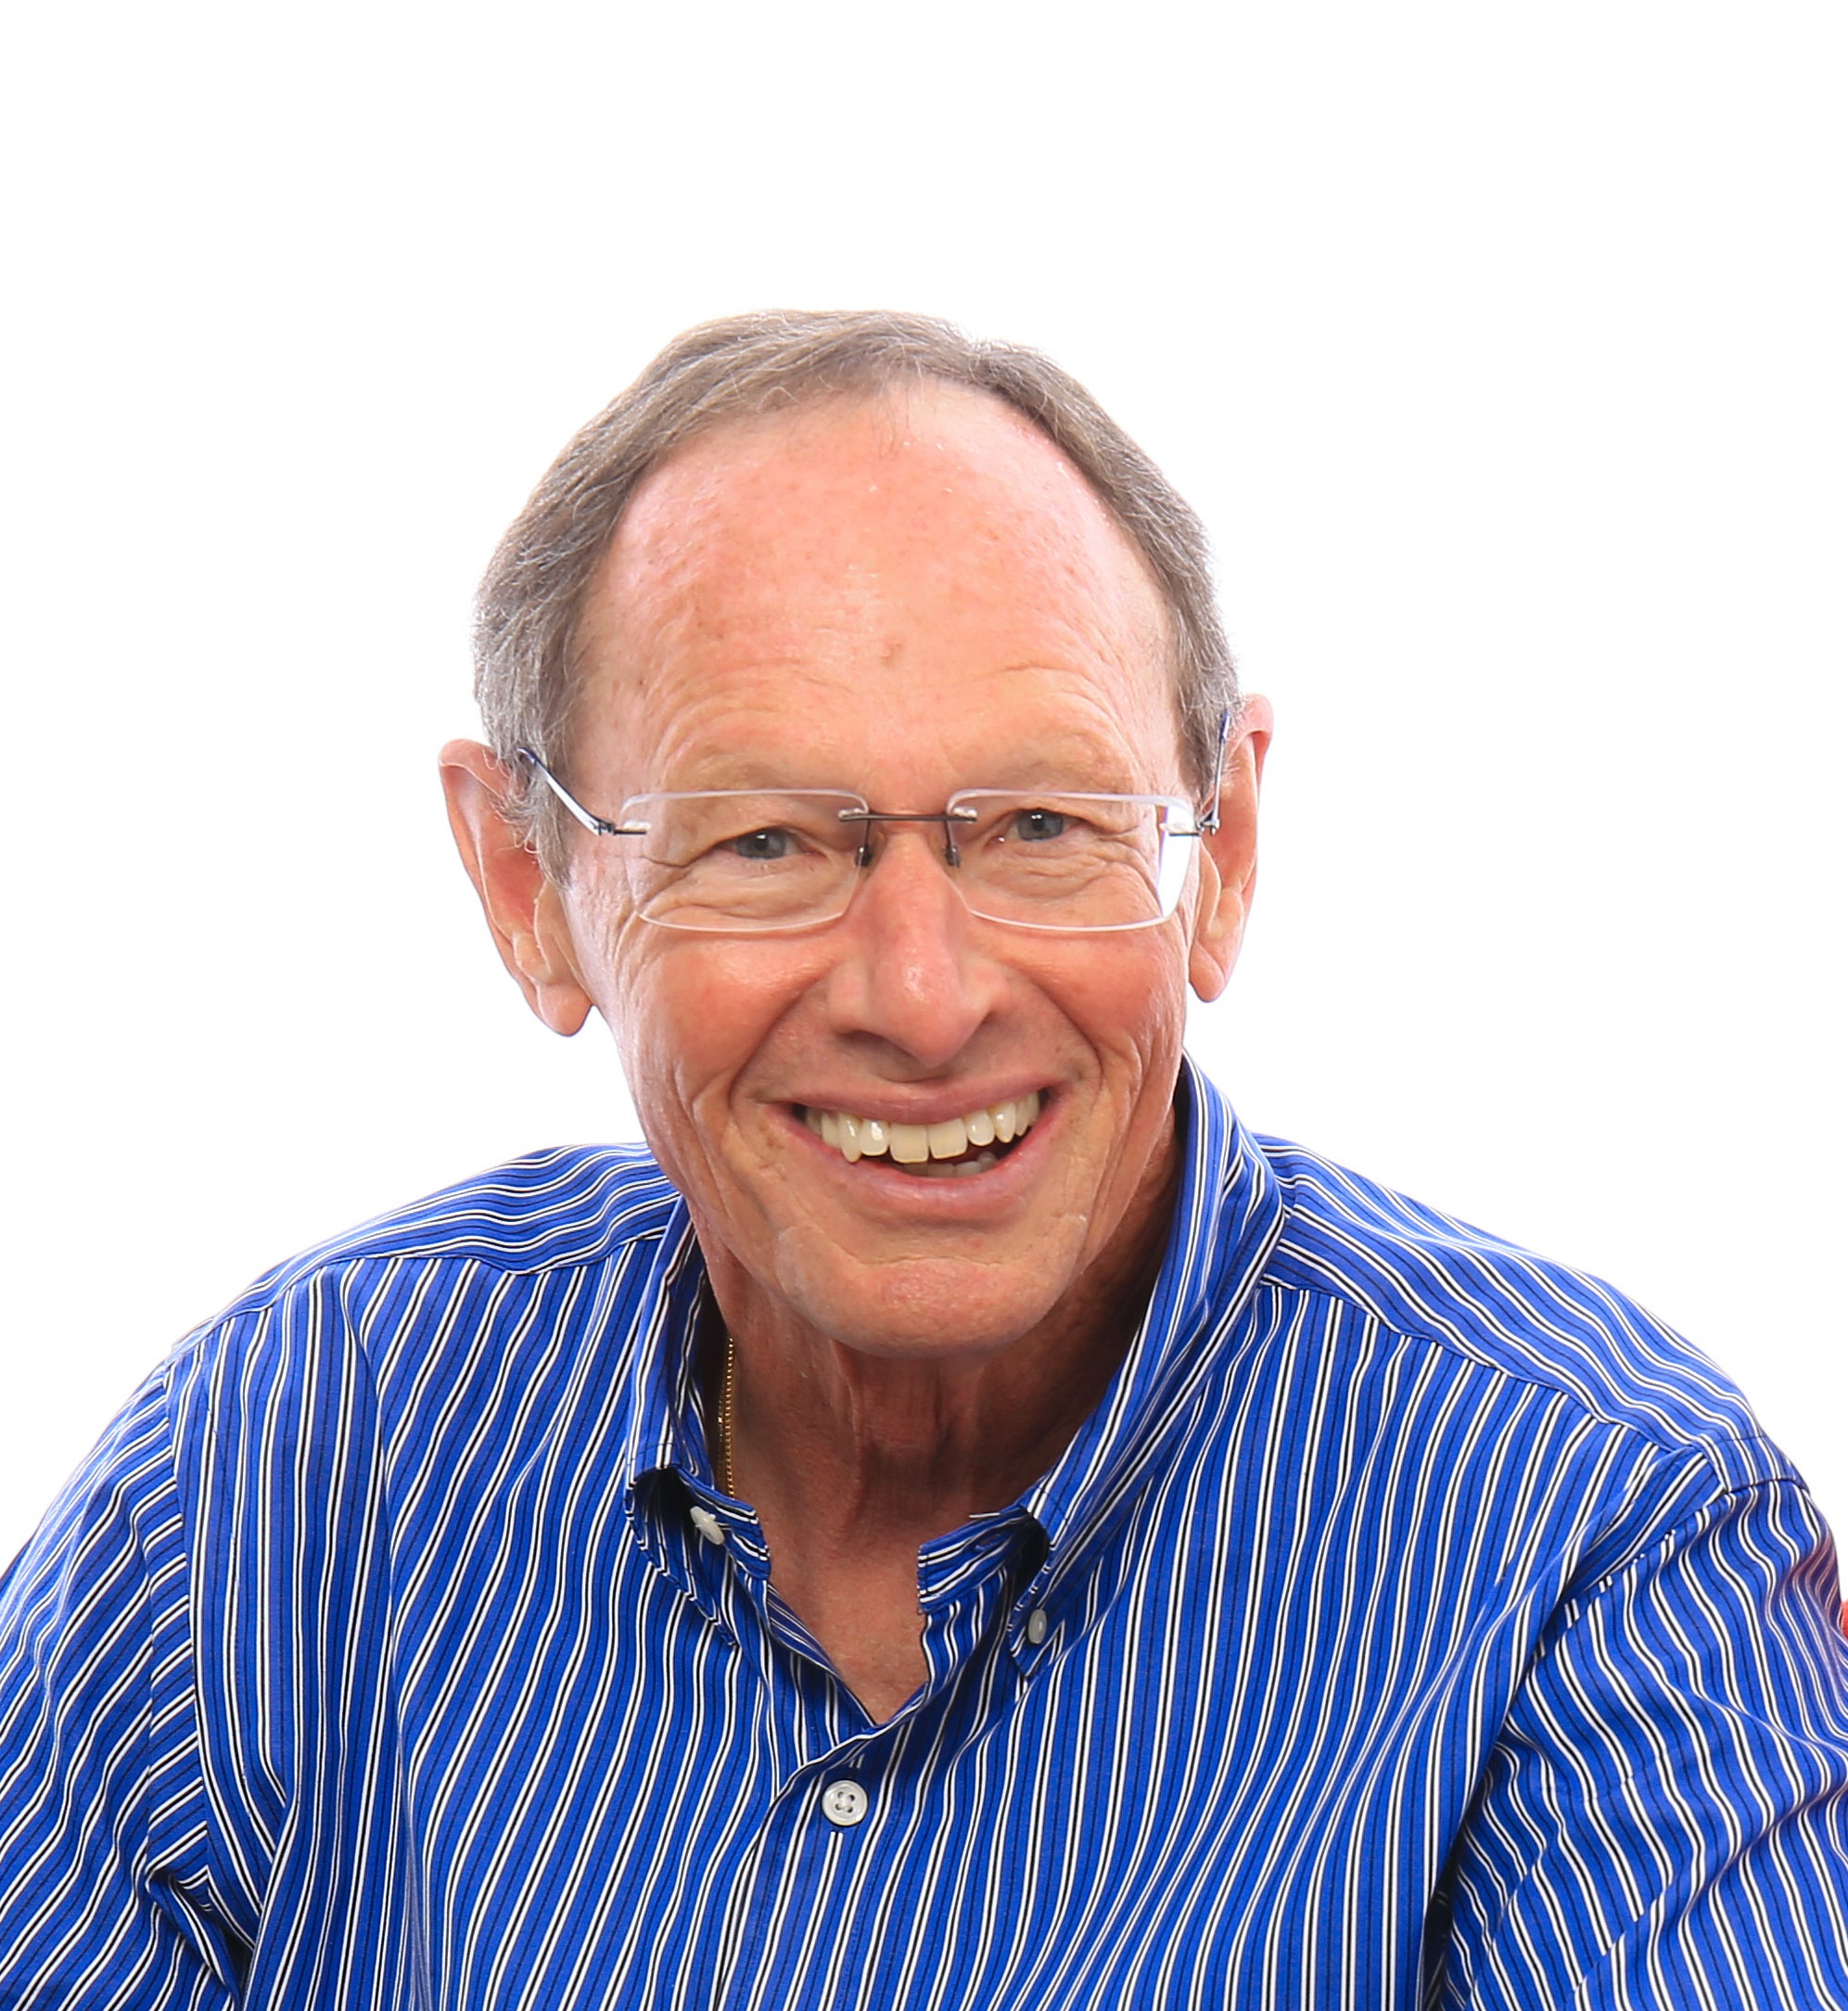 Dr Randall German has been selected to receive the Kempton H Roll Powder Metallurgy (PM) Lifetime Achievement Award.